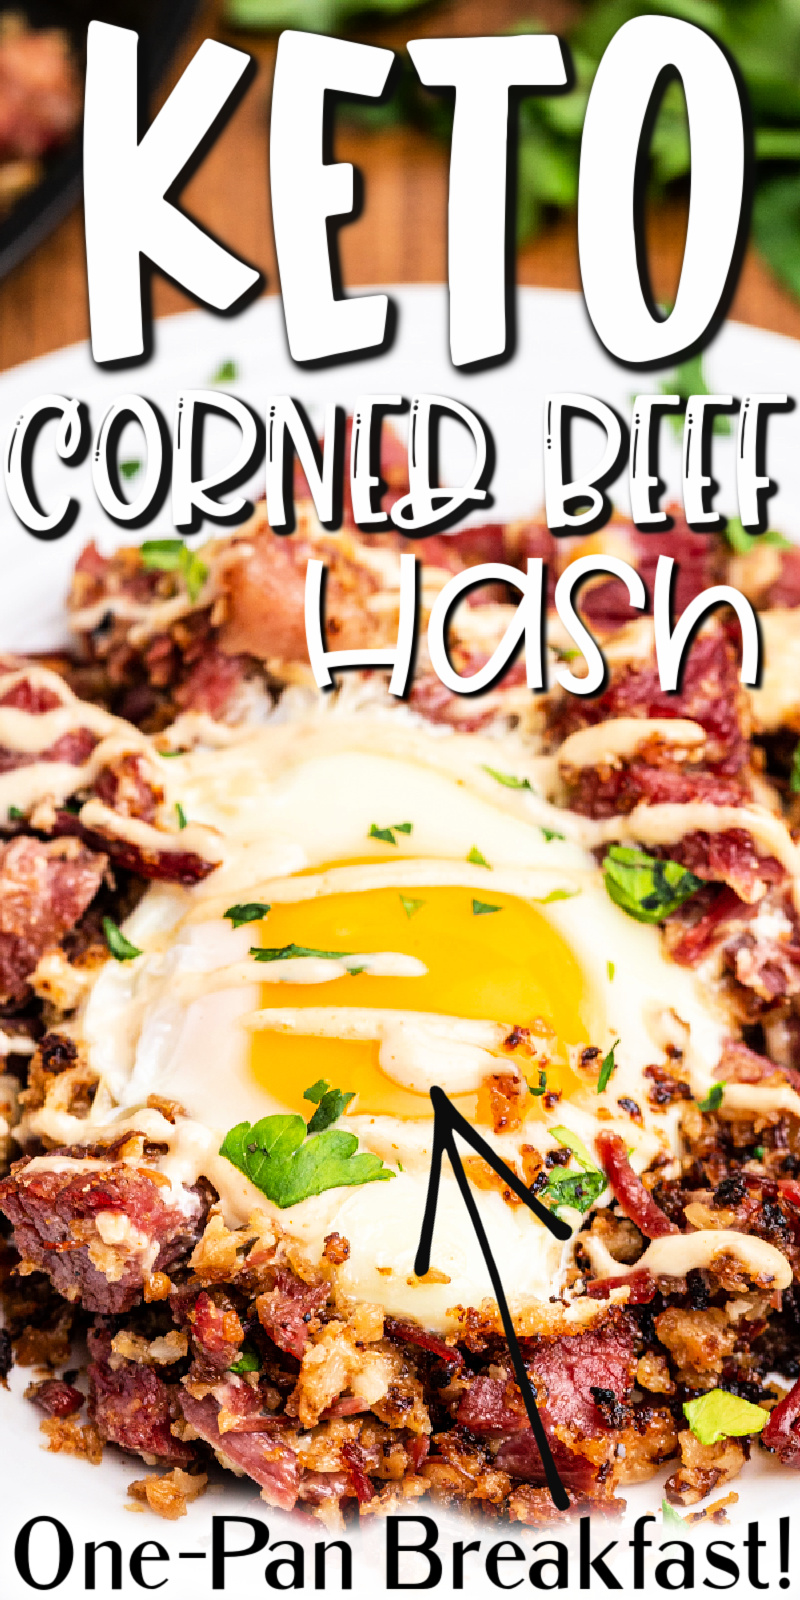 Keto Corned Beef Hash - This keto corned beef hash is the perfect way to use up leftover corned beef in a delicious skillet meal topped with a homemade Russian dressing. #keto #lowcarb #glutenfree #cornedbeef #beef #hash #eggs #breakfast #brunch #onepan #onepot #recipe